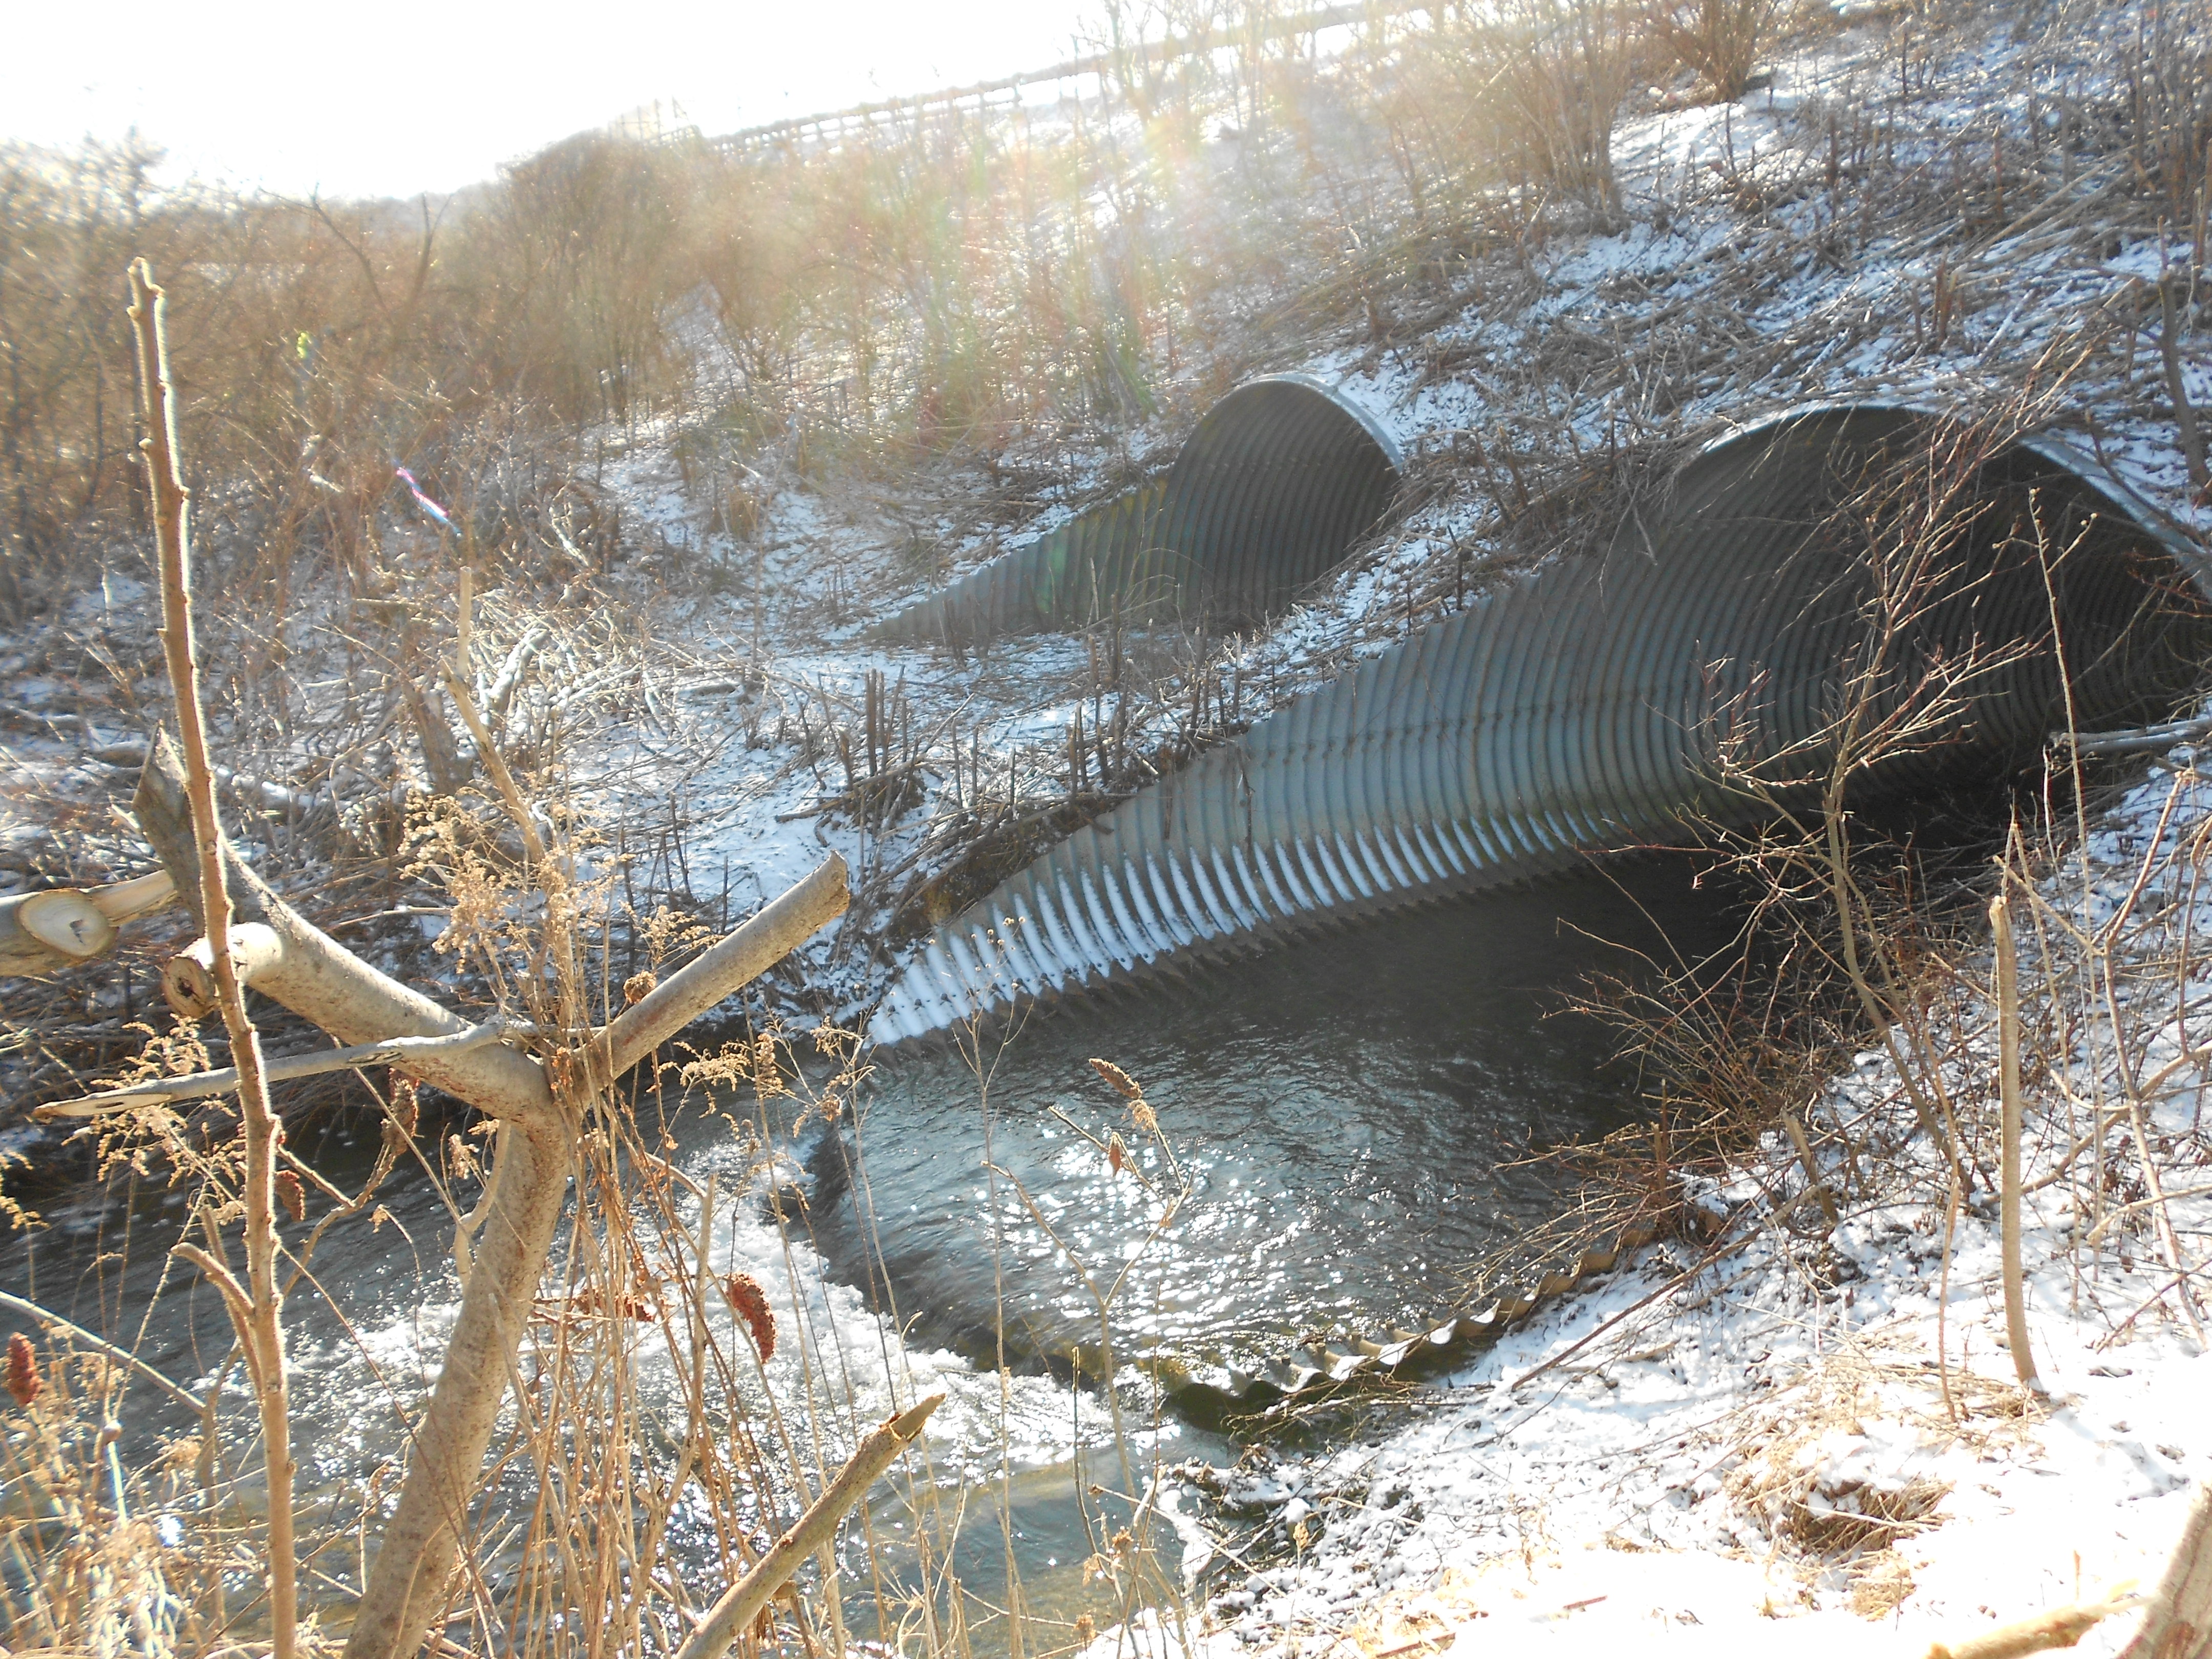 Dual Culverts Carrying Thorn Hill Road over Brush Creek (WB-400B)